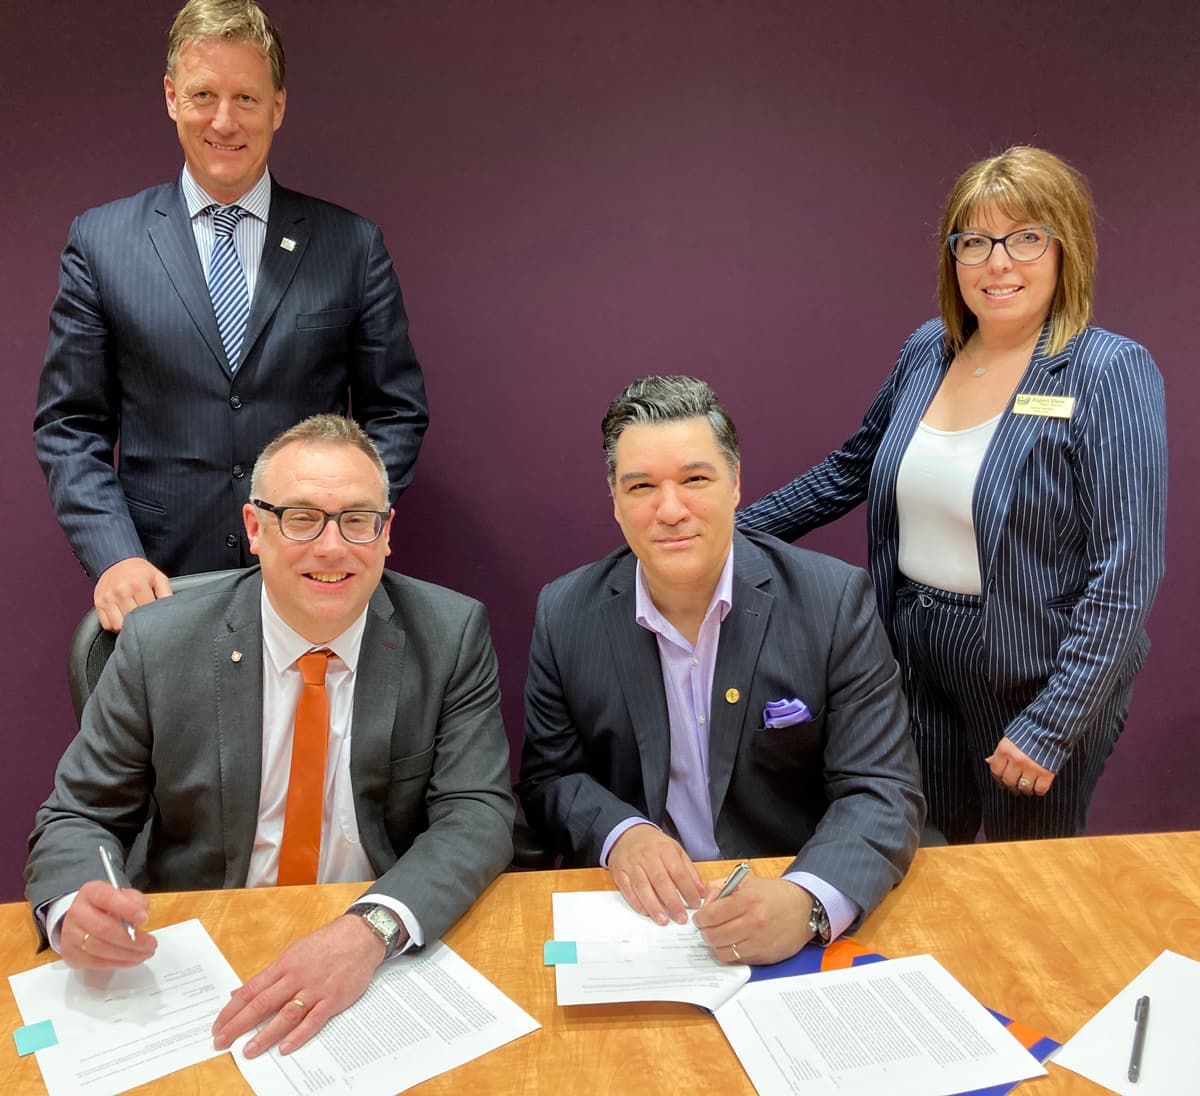 Athabasca University President Dr. Alex Clark and Aspen View Public Schools Superintendent Constantine Kastrinos sign a five-year partnership agreement between the two organizations.